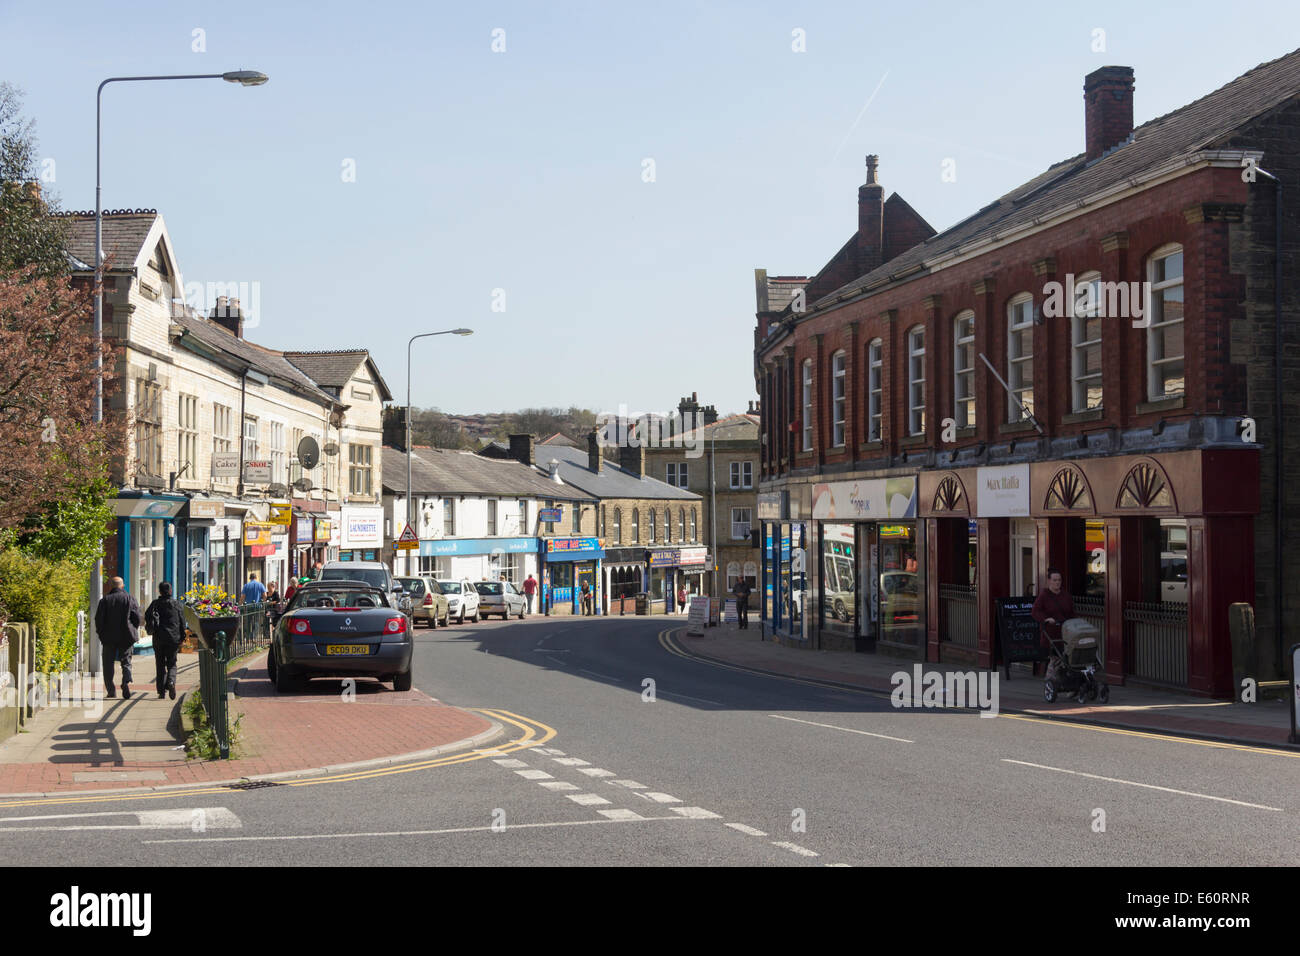 Lee Lane, forming part of the town centre of Horwich, Lancashire. The shopping street has a high proportion of small businesses. Stock Photo